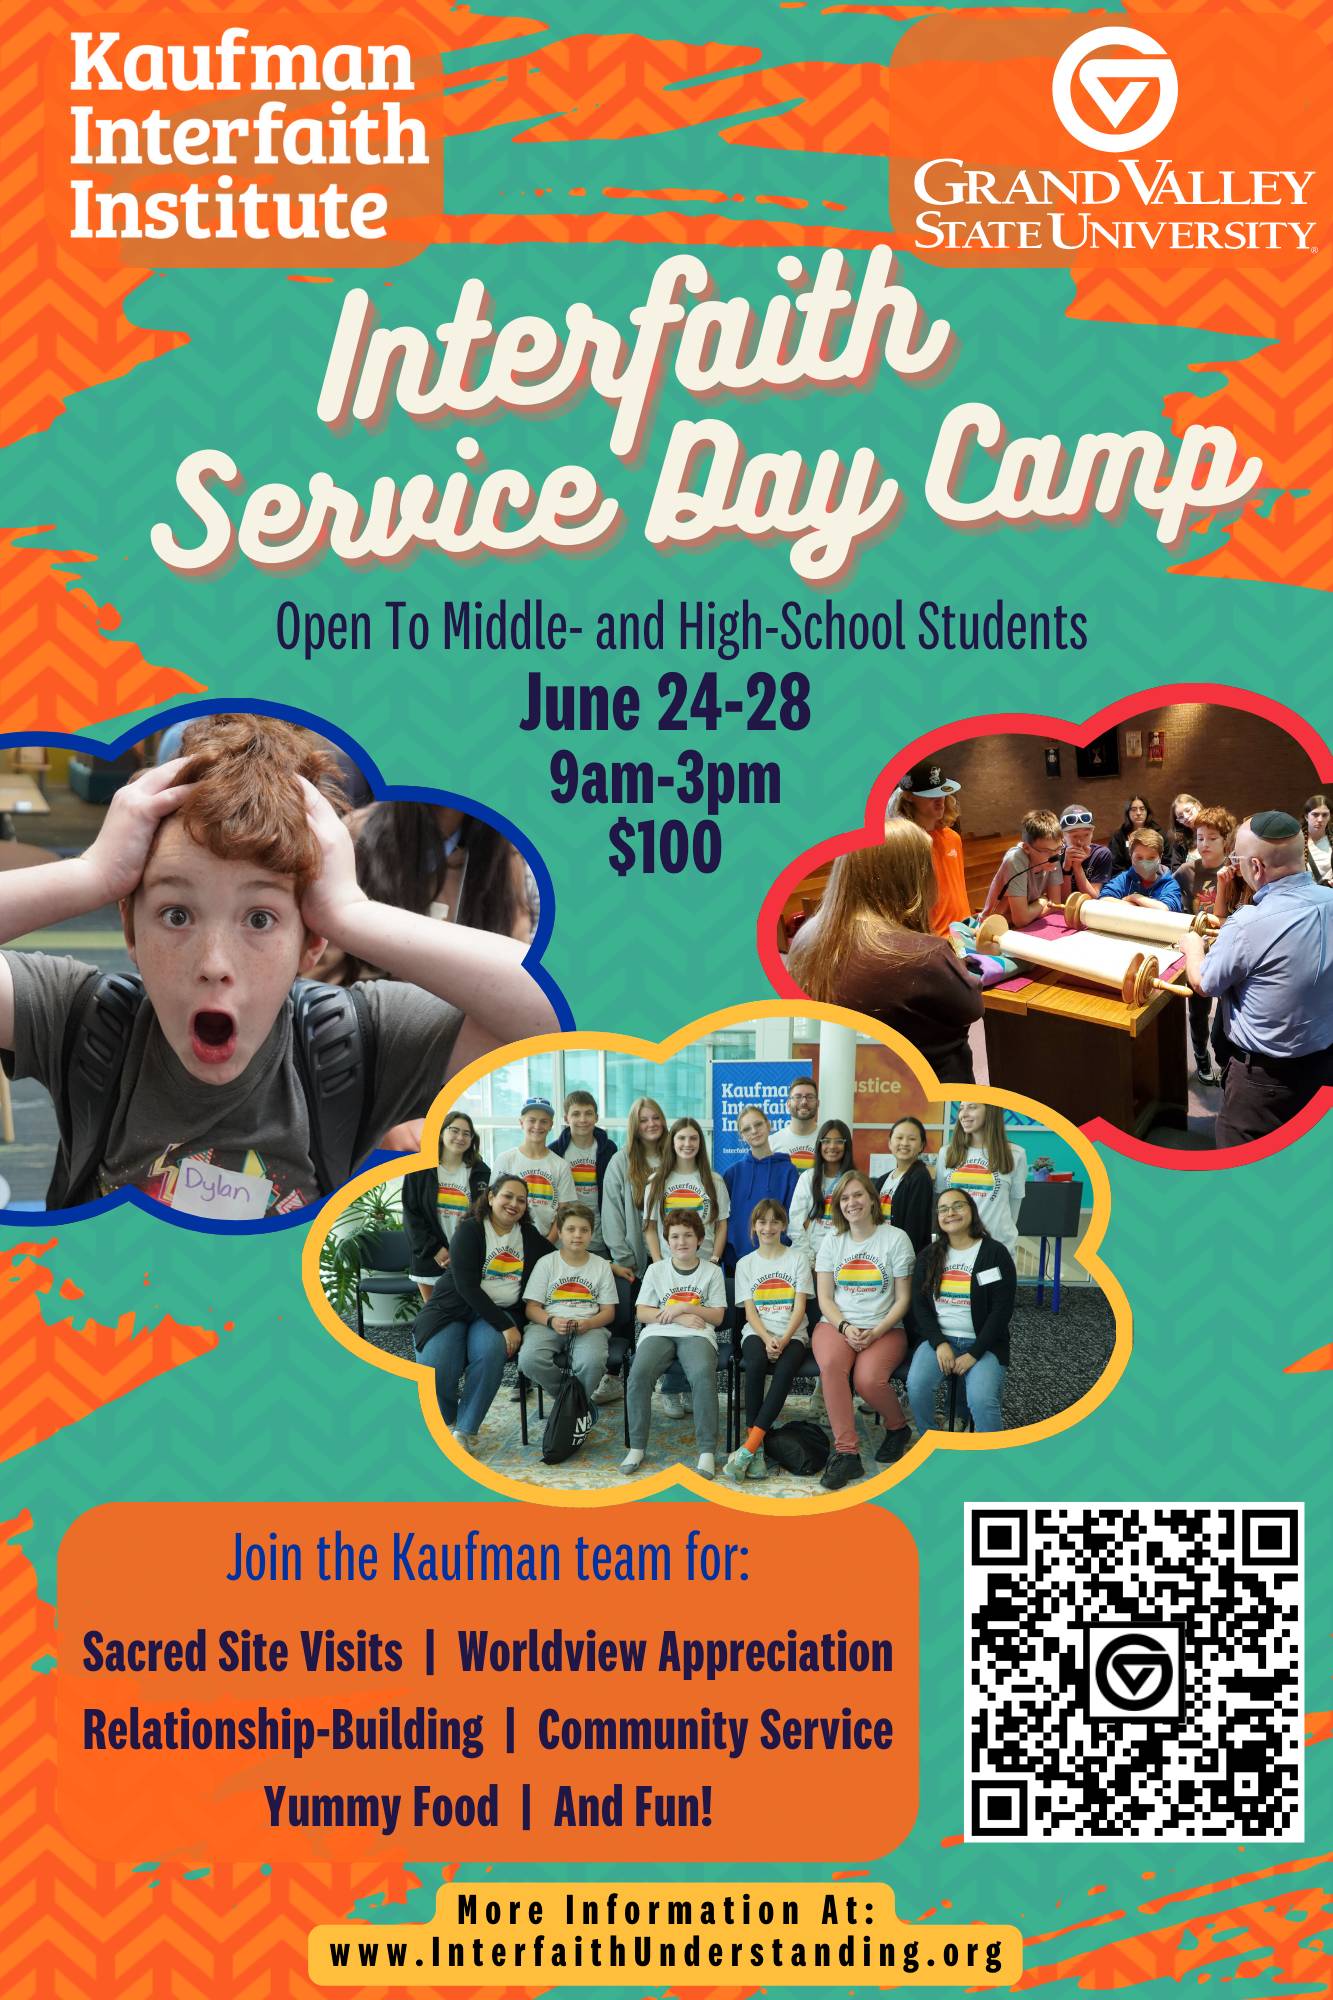 Interfaith Service Day Camp Flyer. Camps happen from June24-28. Click for registration details.